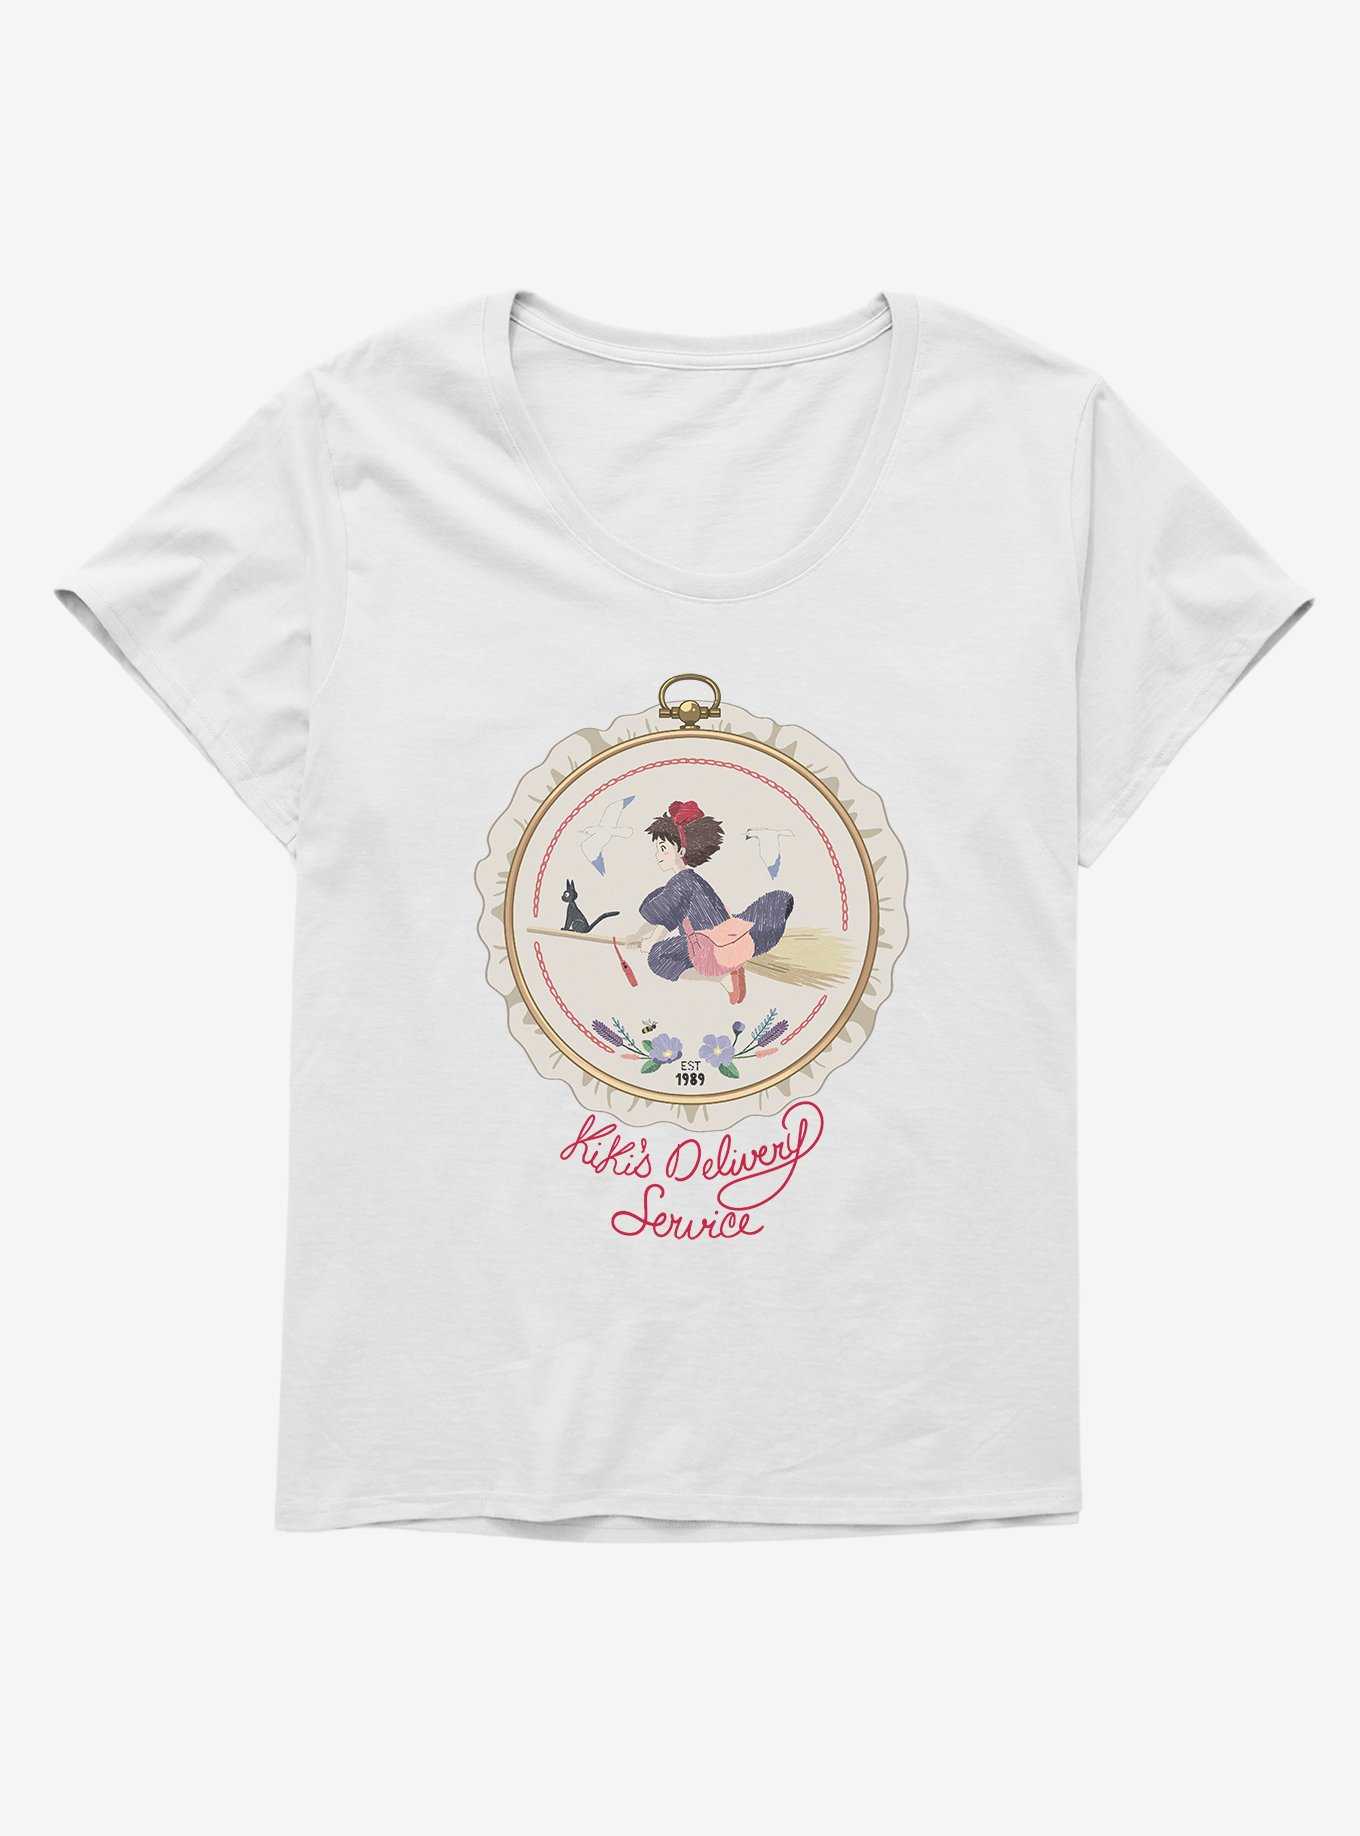 Studio Ghibli Kiki's Delivery Service Sewing Patch Girls T-Shirt Plus Size, , hi-res